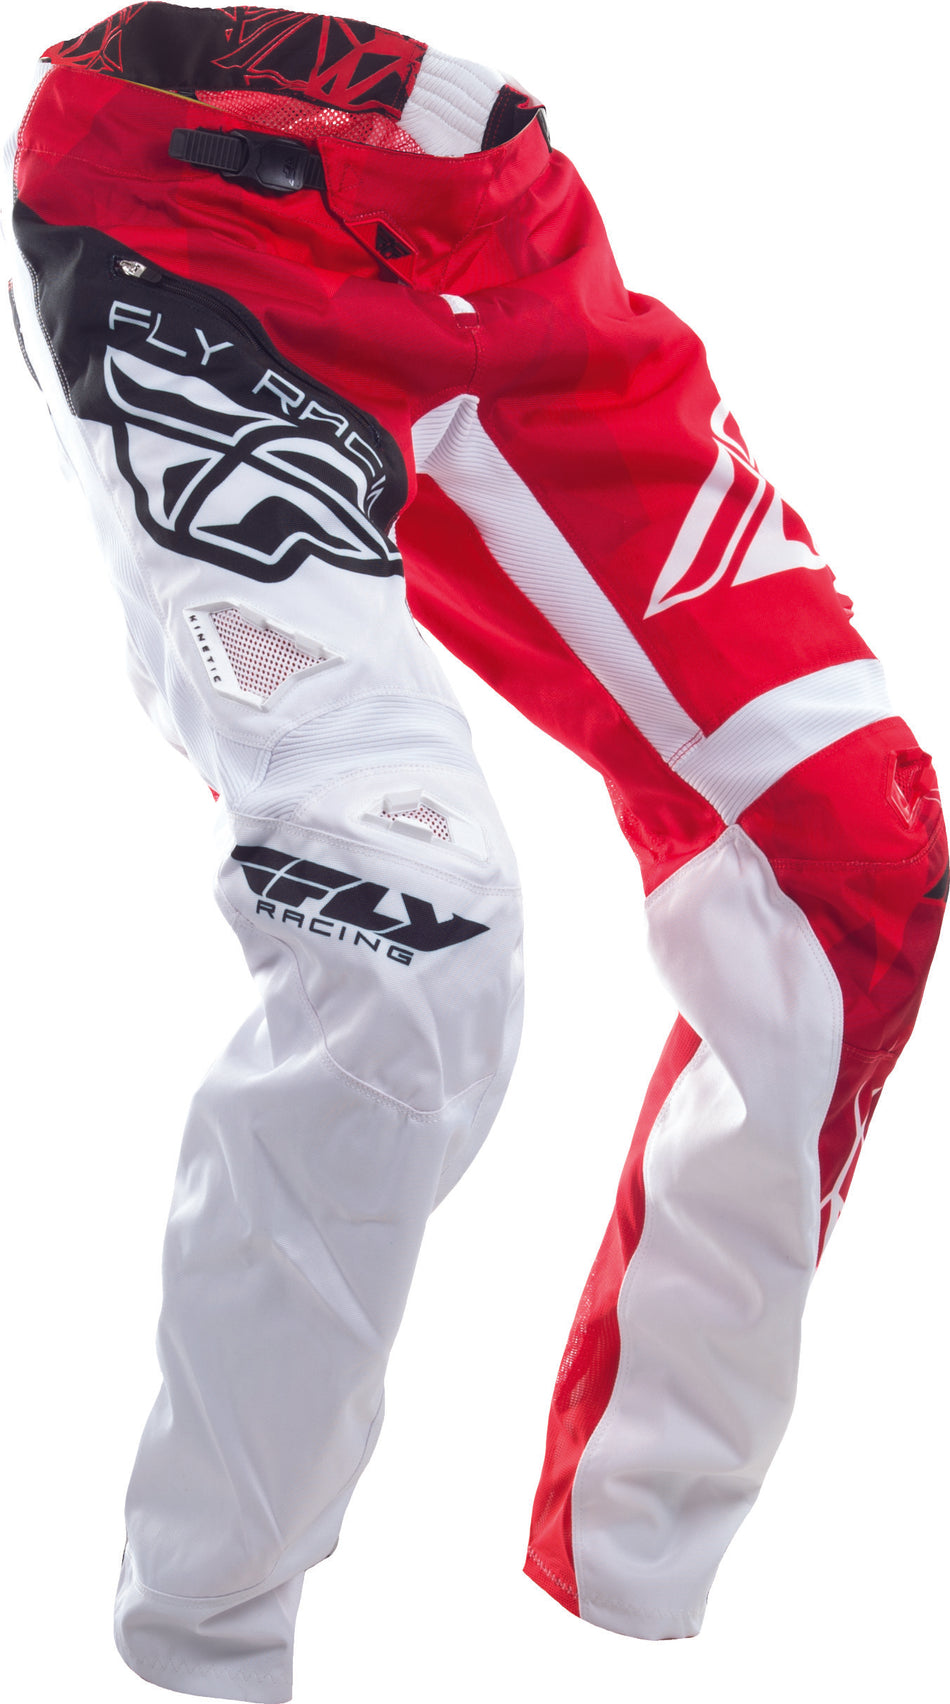 FLY RACING Bicycle Crux Pant Red/White Sz 28 370-02228